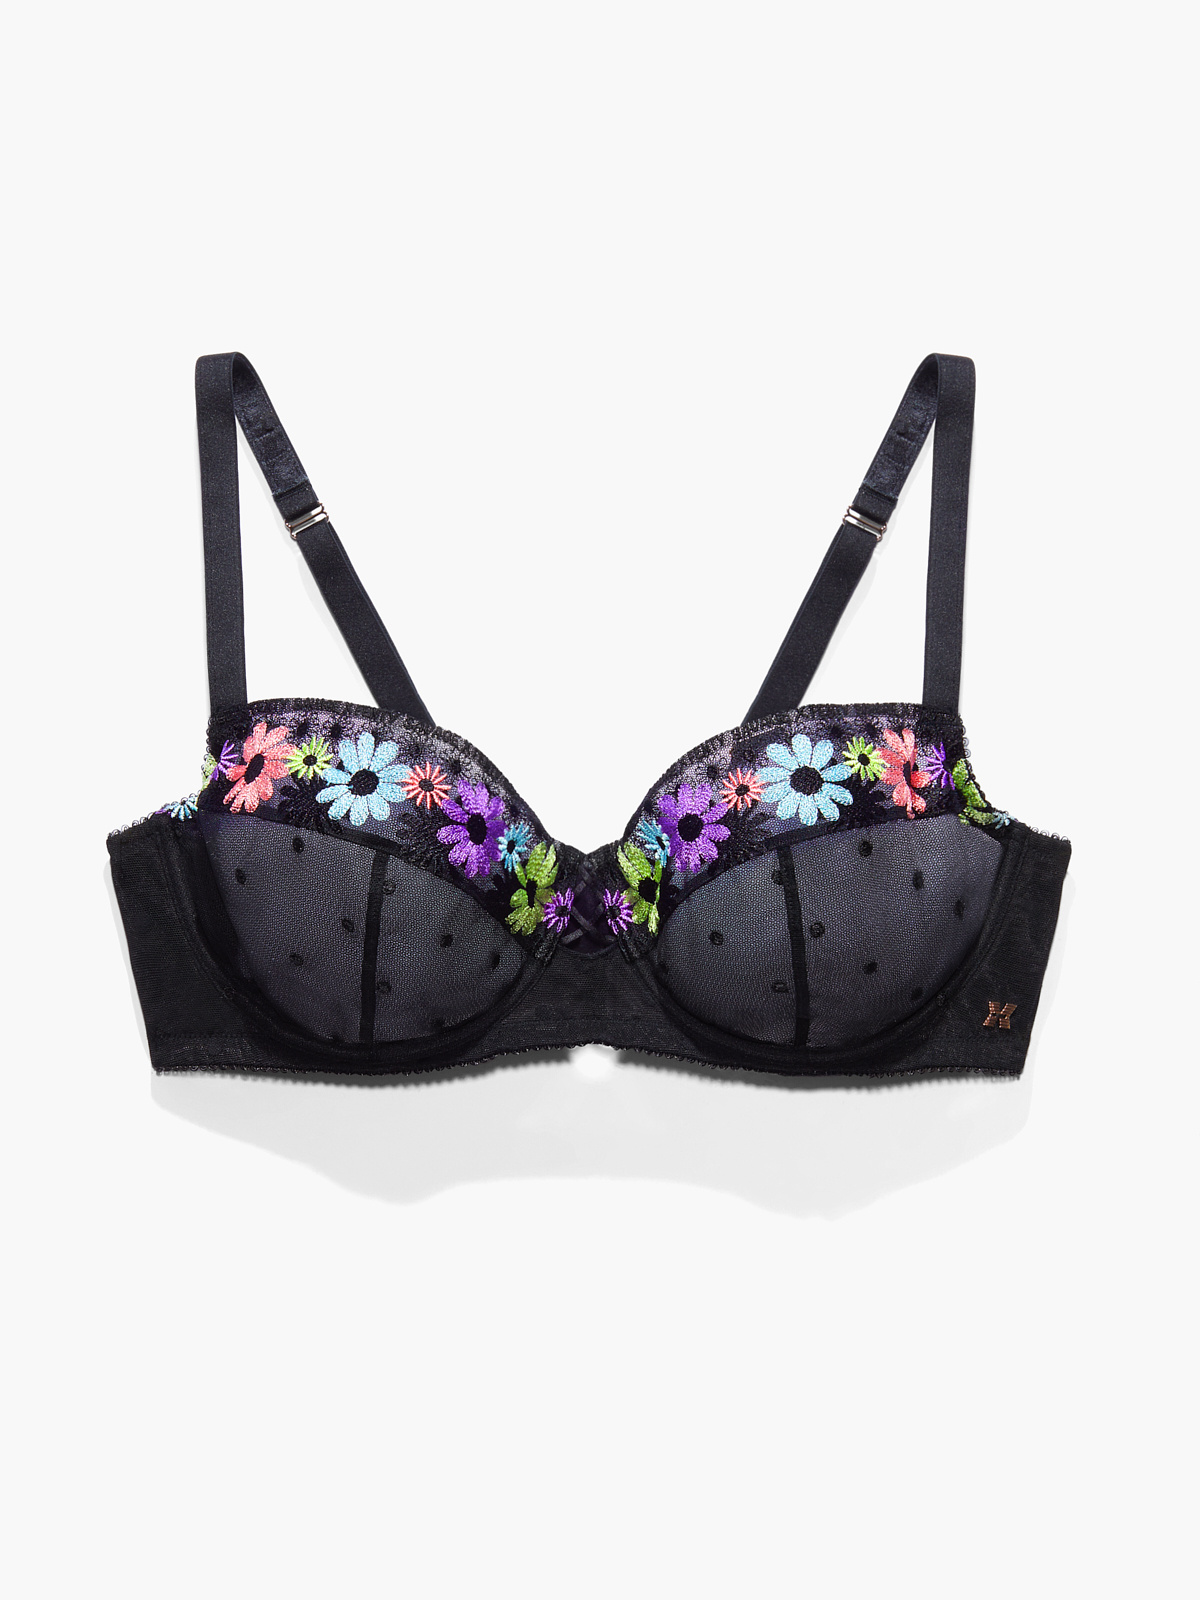 SAVAGE X FENTY, foiled springs embroidered unlined bra